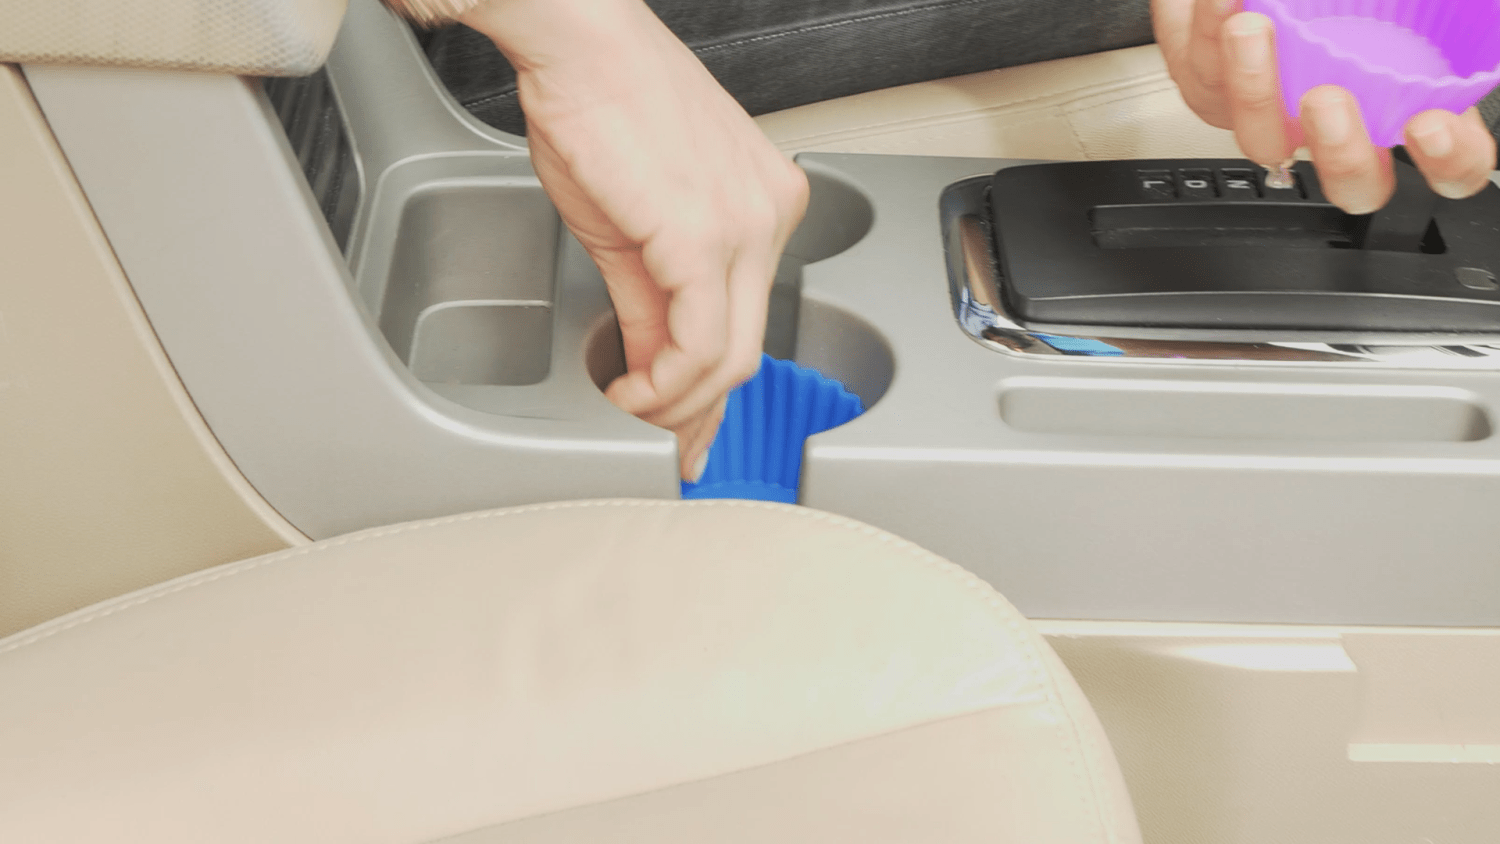 How to clean your car with easy tricks